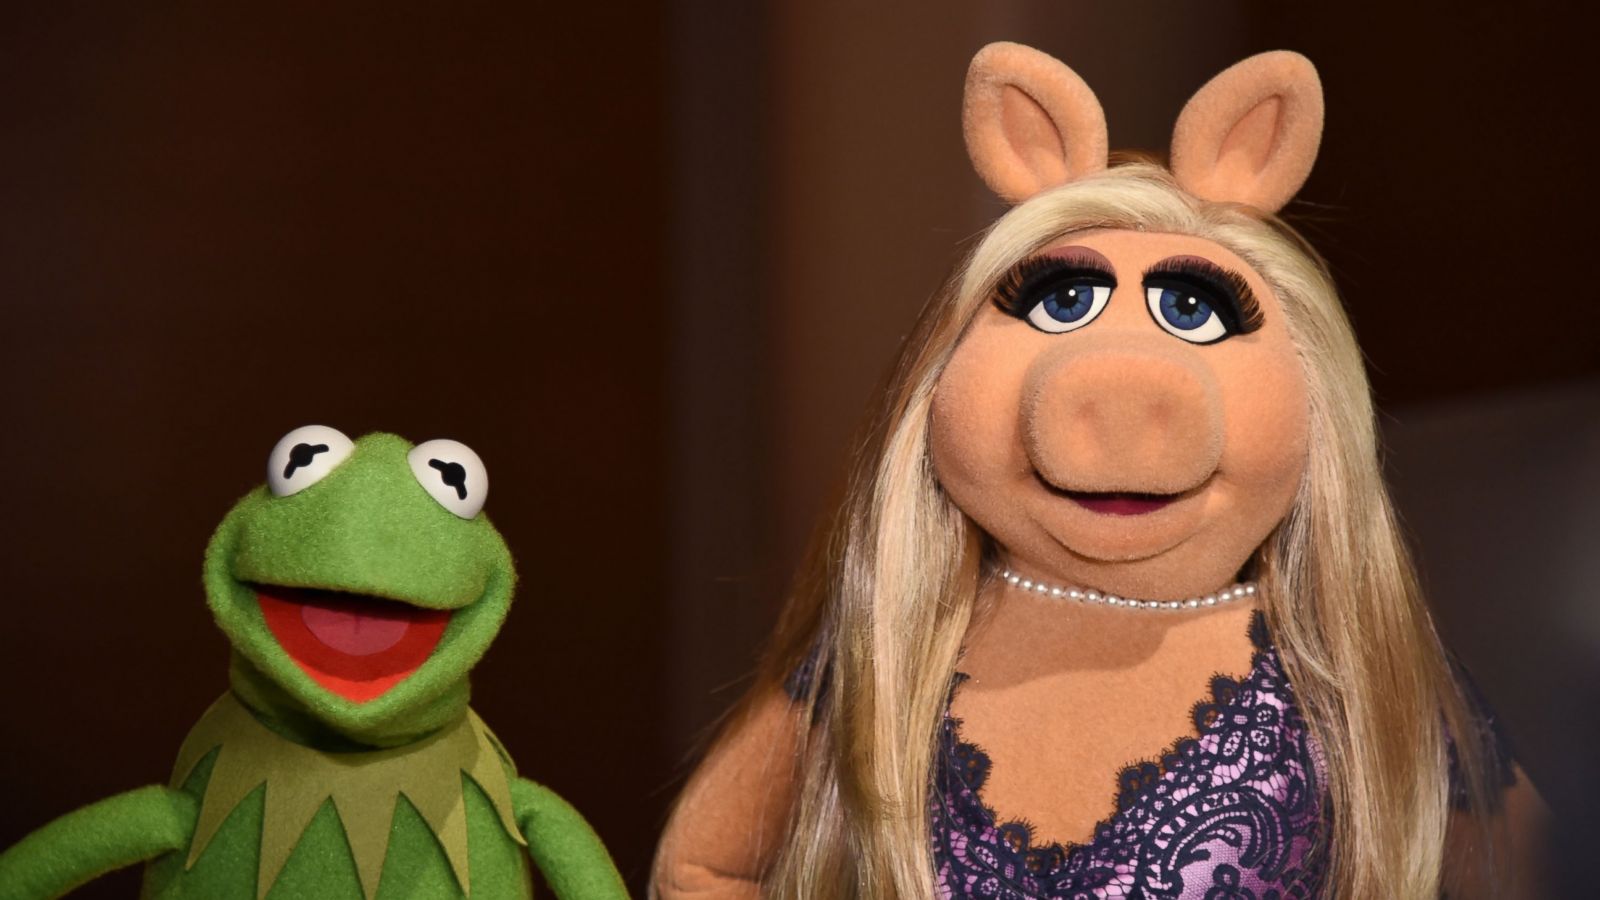 Kermit the Frog and Miss Piggy 'Terminate Romantic Relationship'